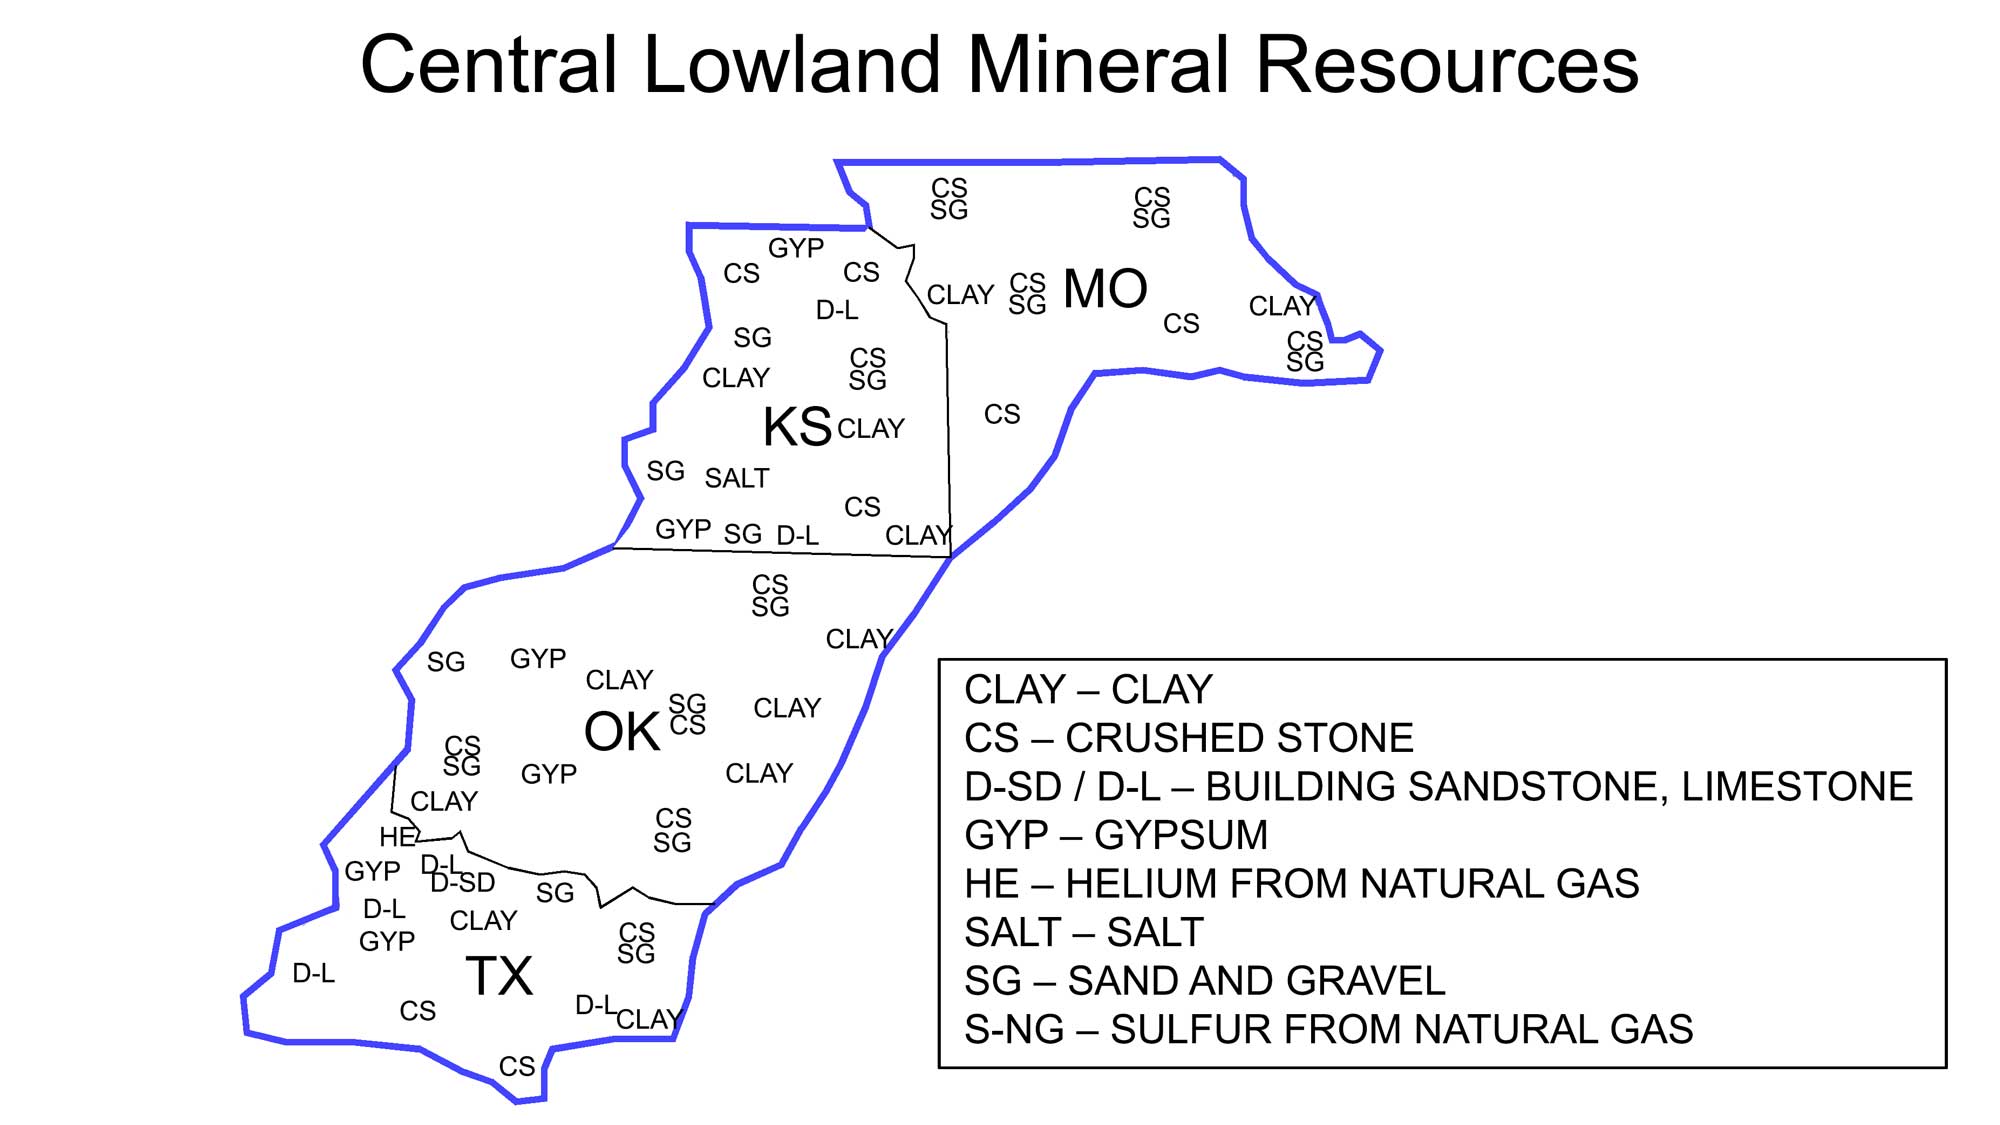 Map showing the locations of different types of mineral resources in the Central Lowland region of the South-Central United States.